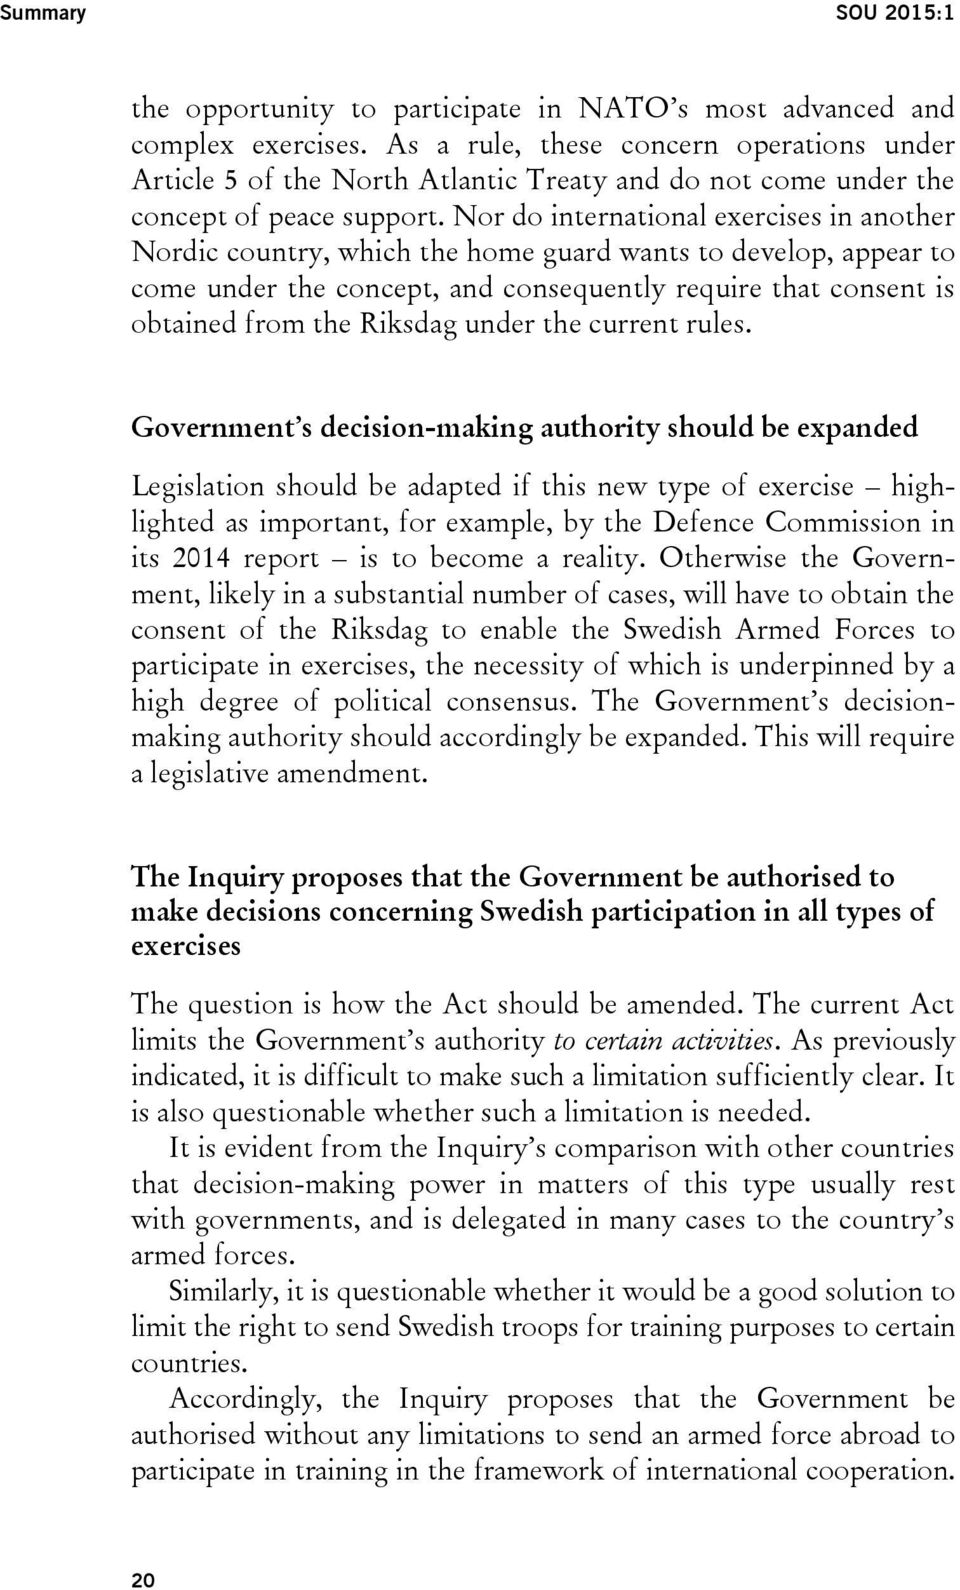 Nor do international exercises in another Nordic country, which the home guard wants to develop, appear to come under the concept, and consequently require that consent is obtained from the Riksdag